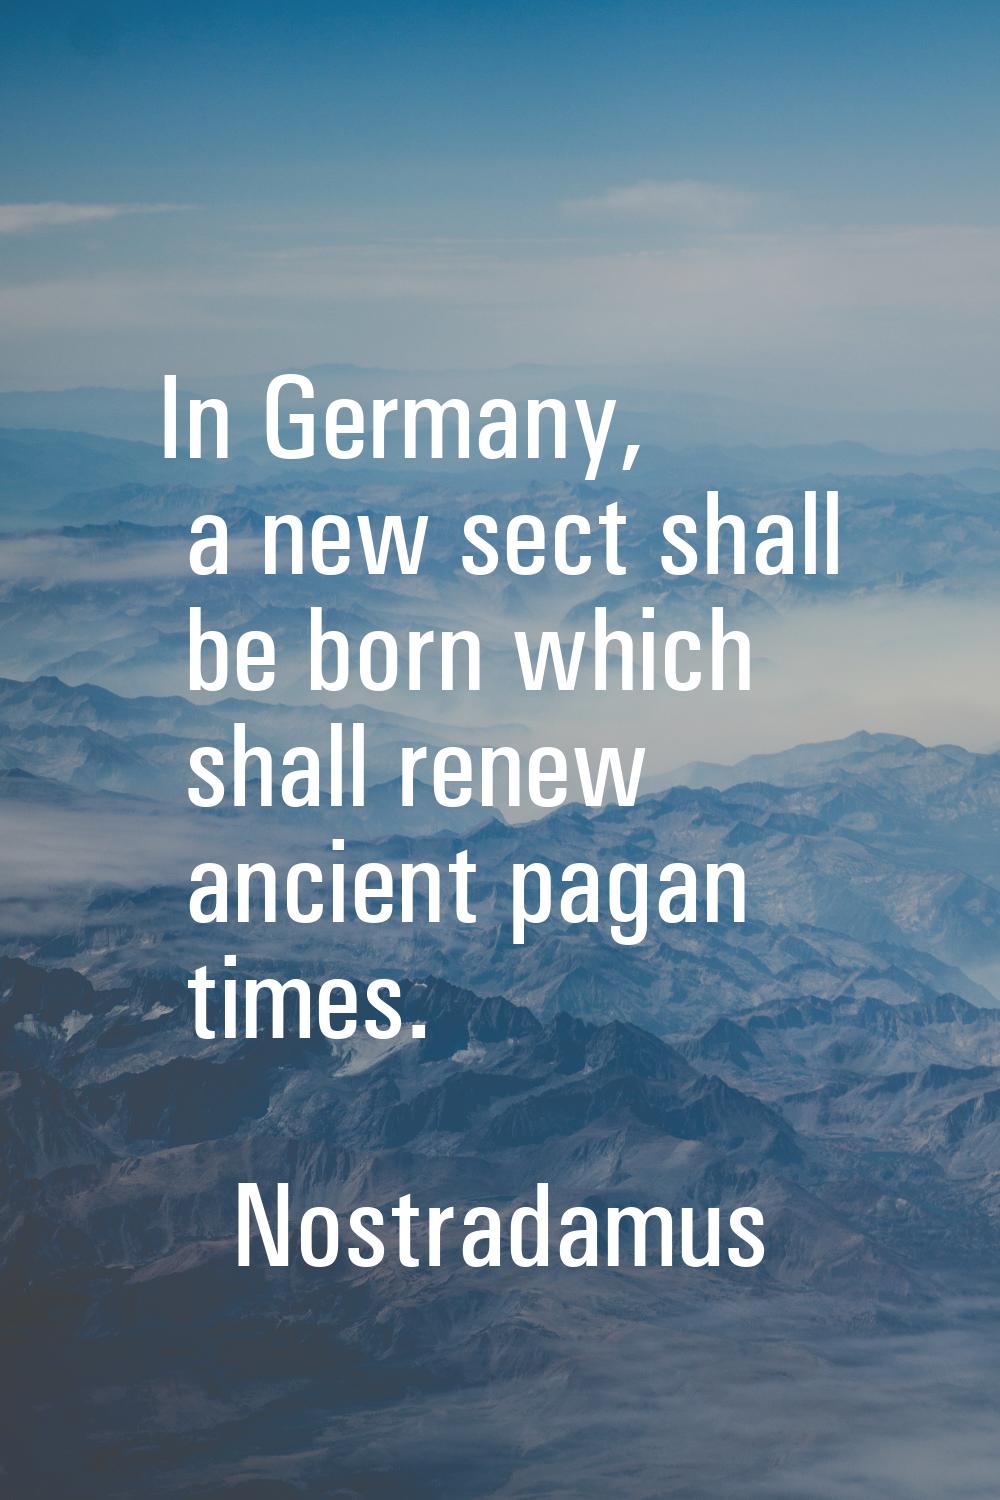 In Germany, a new sect shall be born which shall renew ancient pagan times.